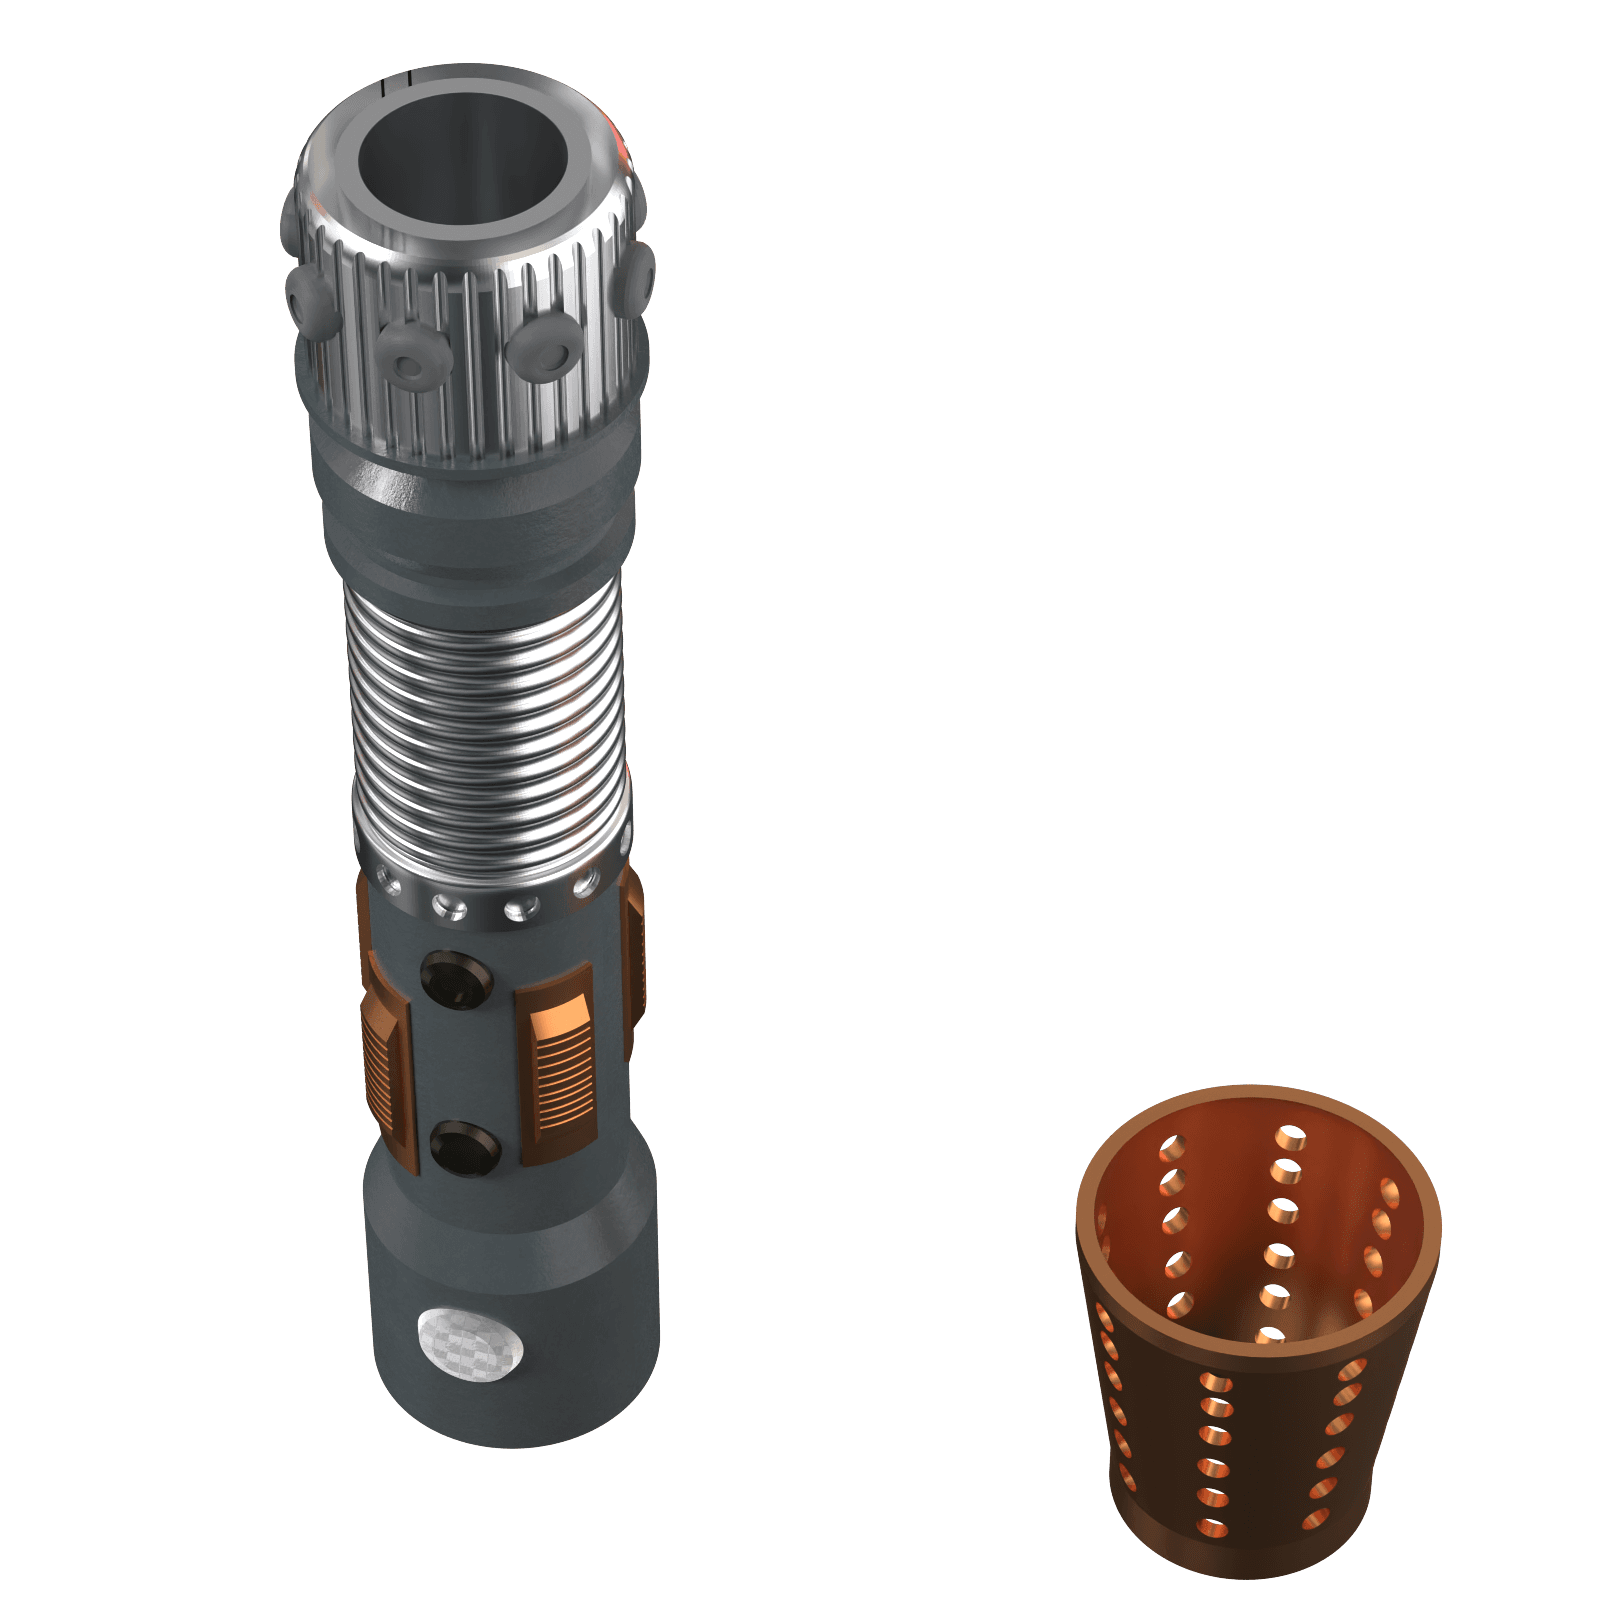 Print in Place Collapsing Jedi Lightsaber Concept 9 3d model